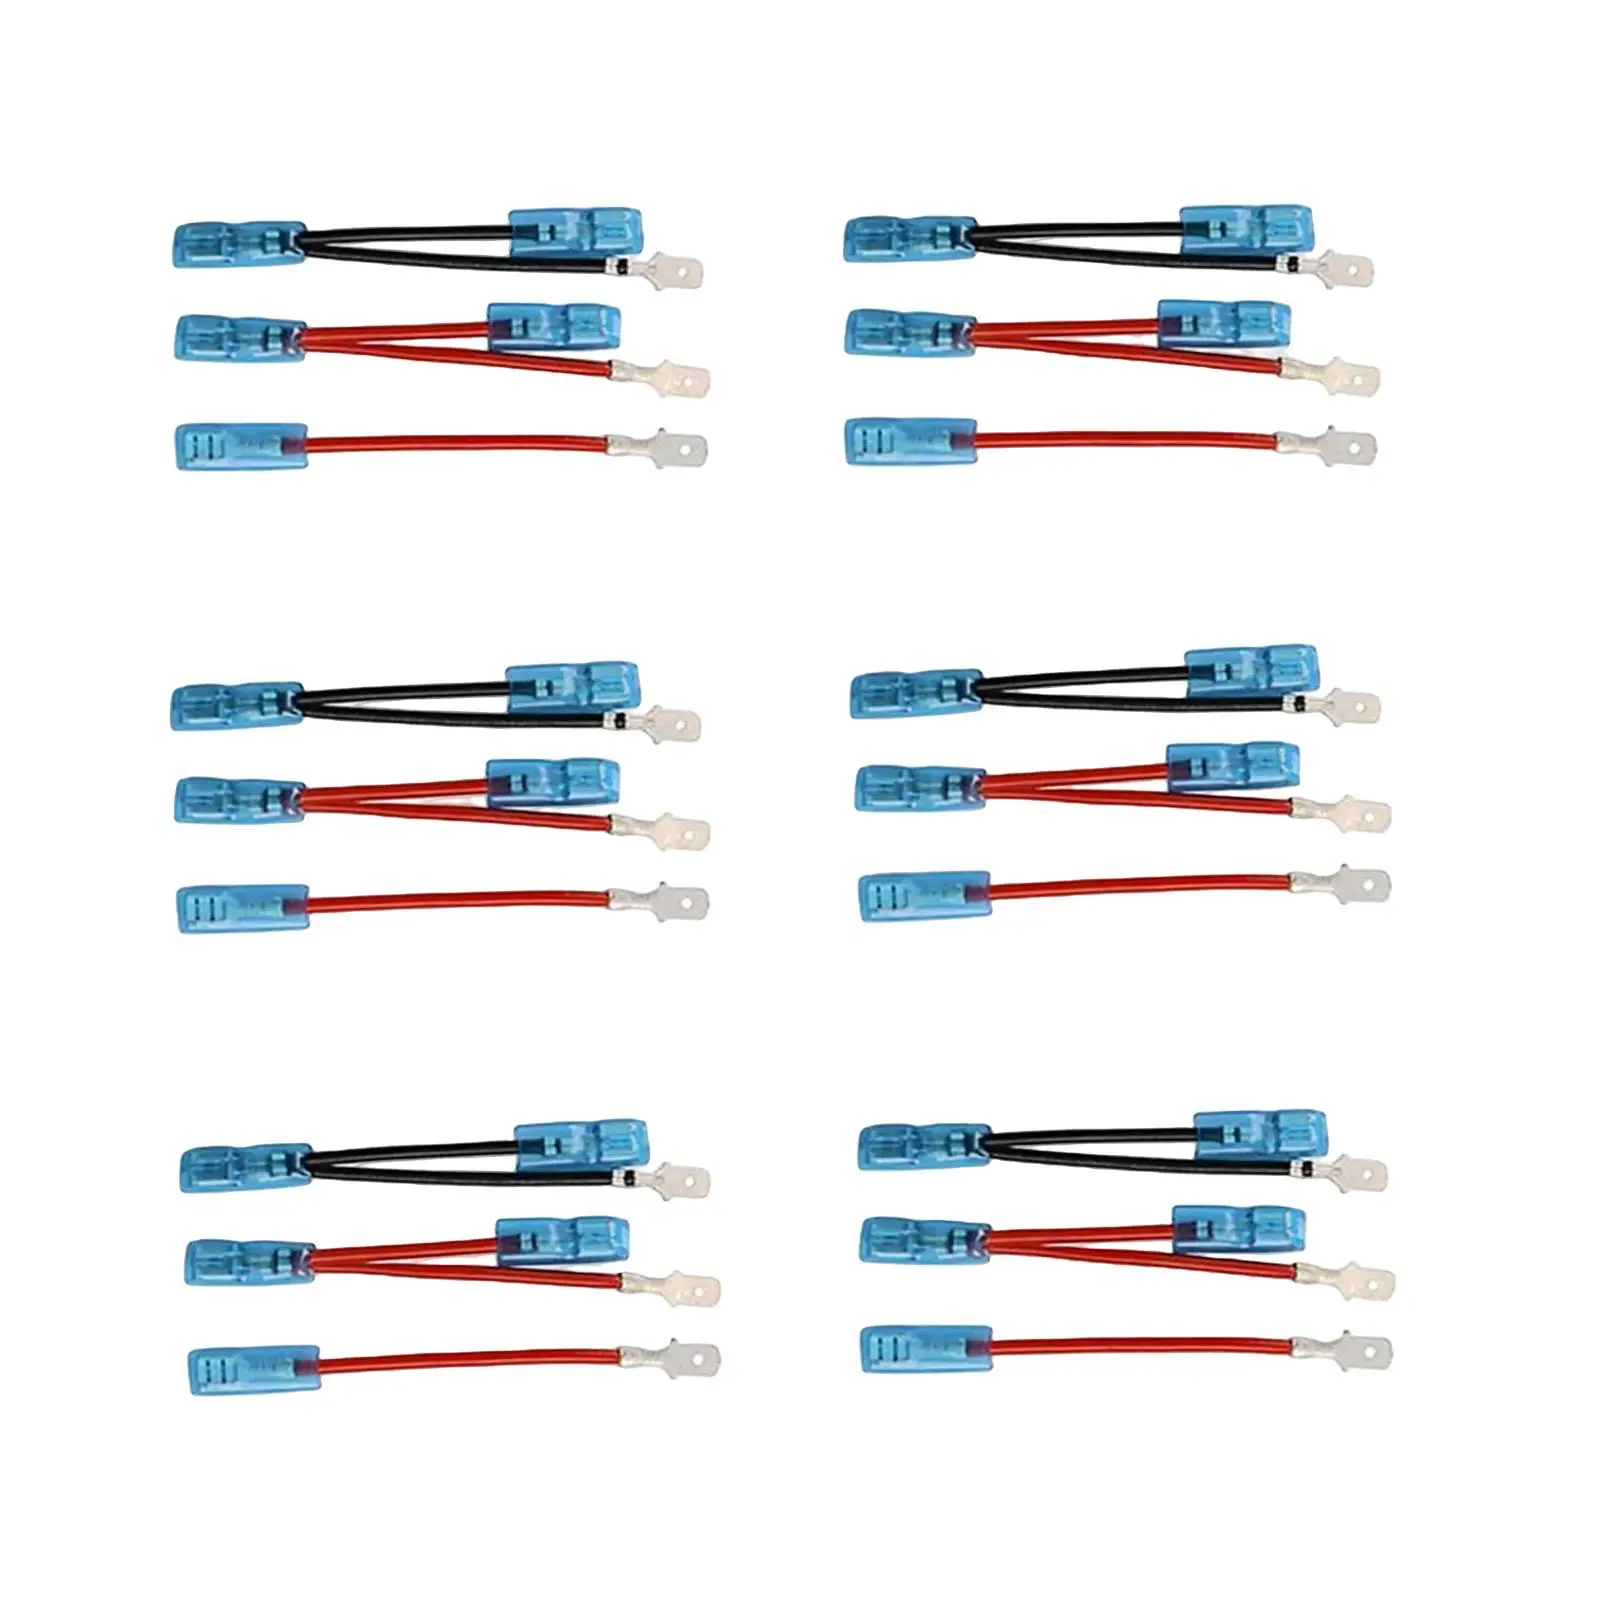 6 Pieces 5 Pin Rocker Switch Jumper Wires Set with Male Female Terminal Replacement Spare Parts Accessory for Marine Boat